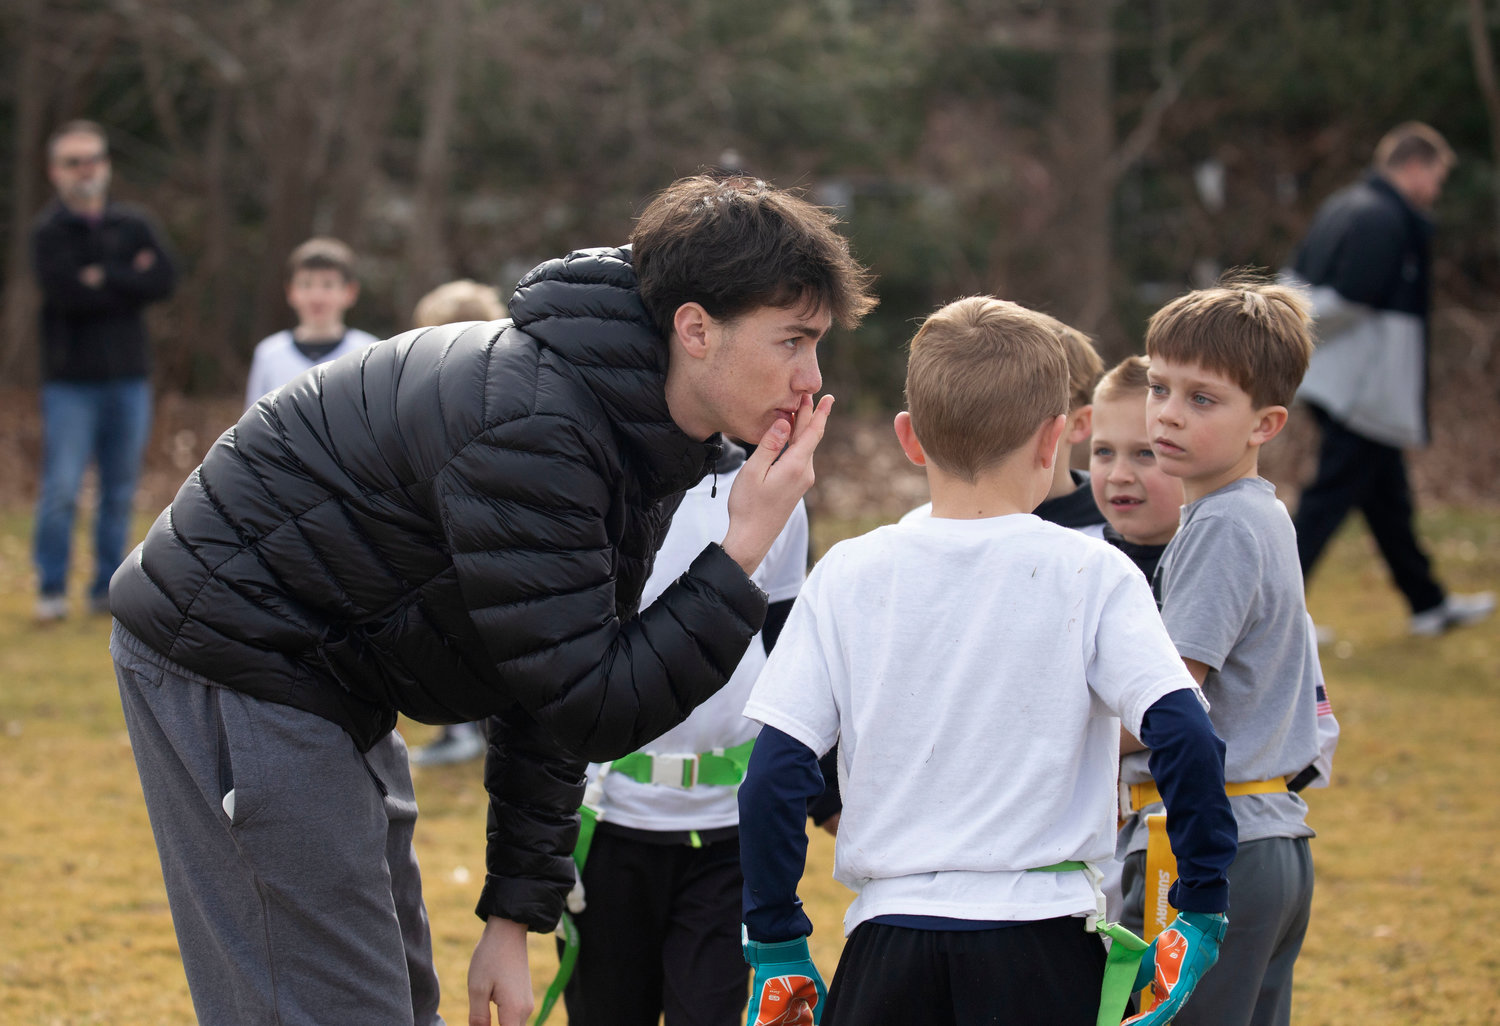 BHS student Jack Robinson (left) coaches a group of youngsters during the flag football tournament which was organized by Ryan O’Connell and Harrison Cooley as part of their Senior Projects.